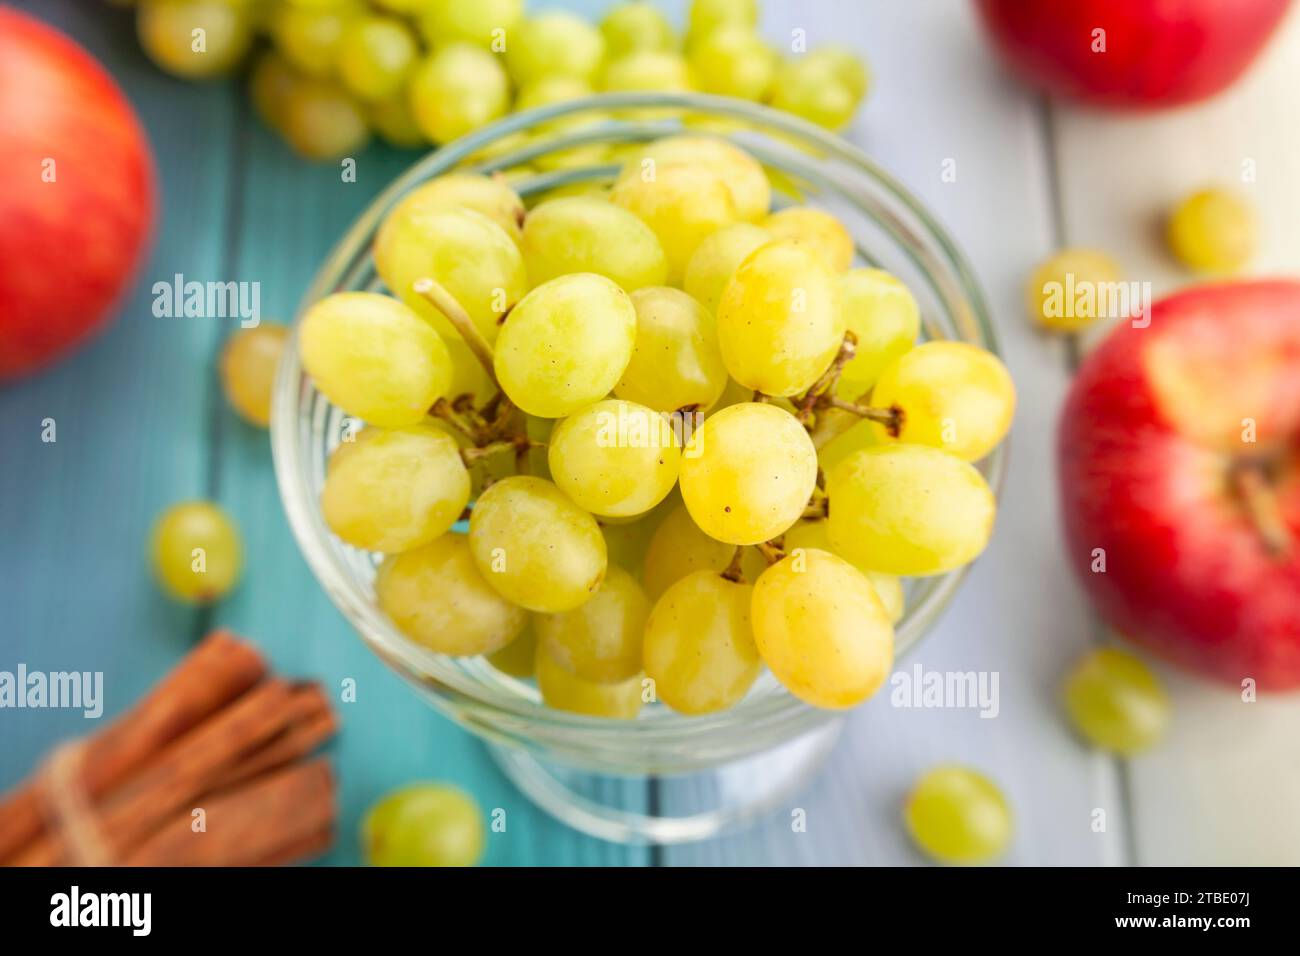 sultana grapes on wood background Stock Photo